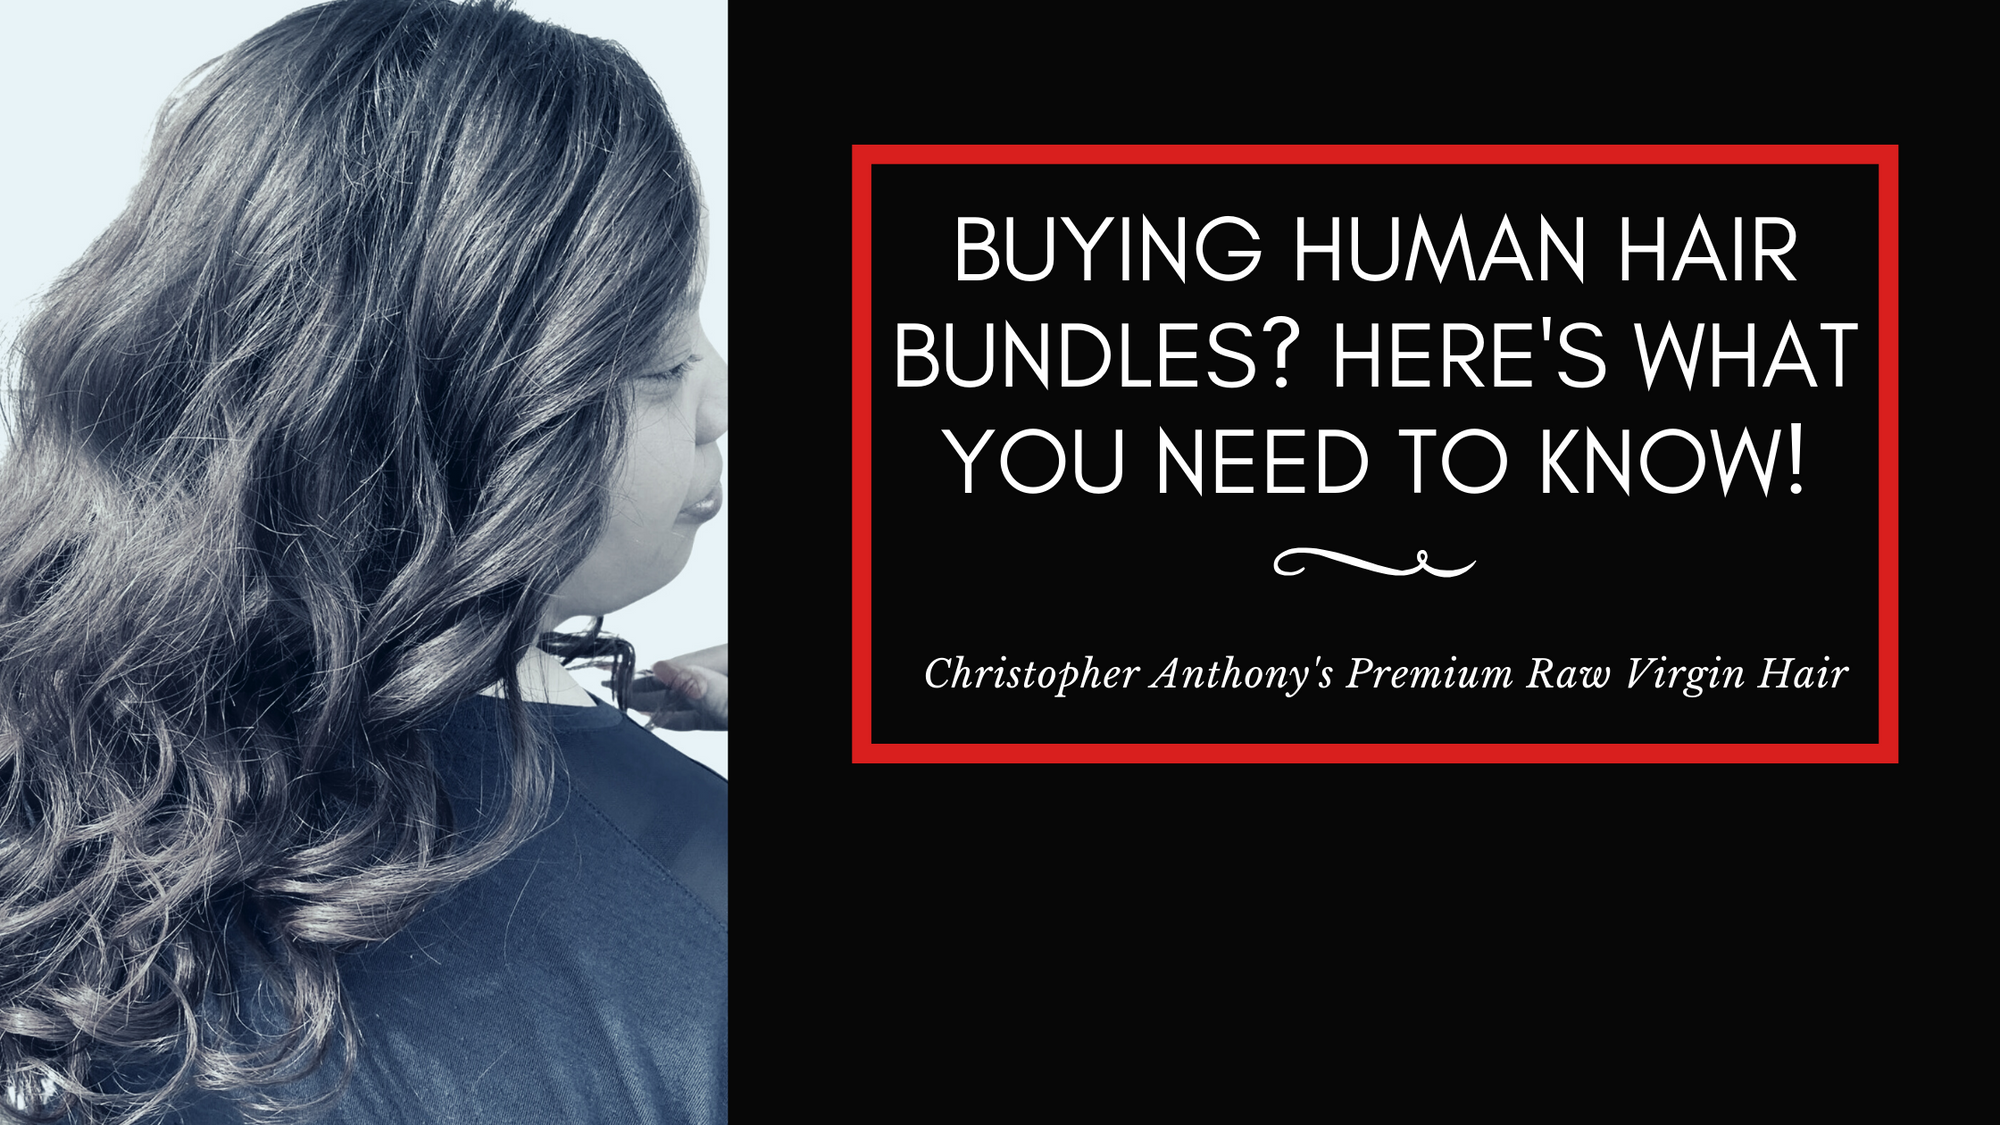 Buying Human Hair Bundles? Here's What You Need to Know!